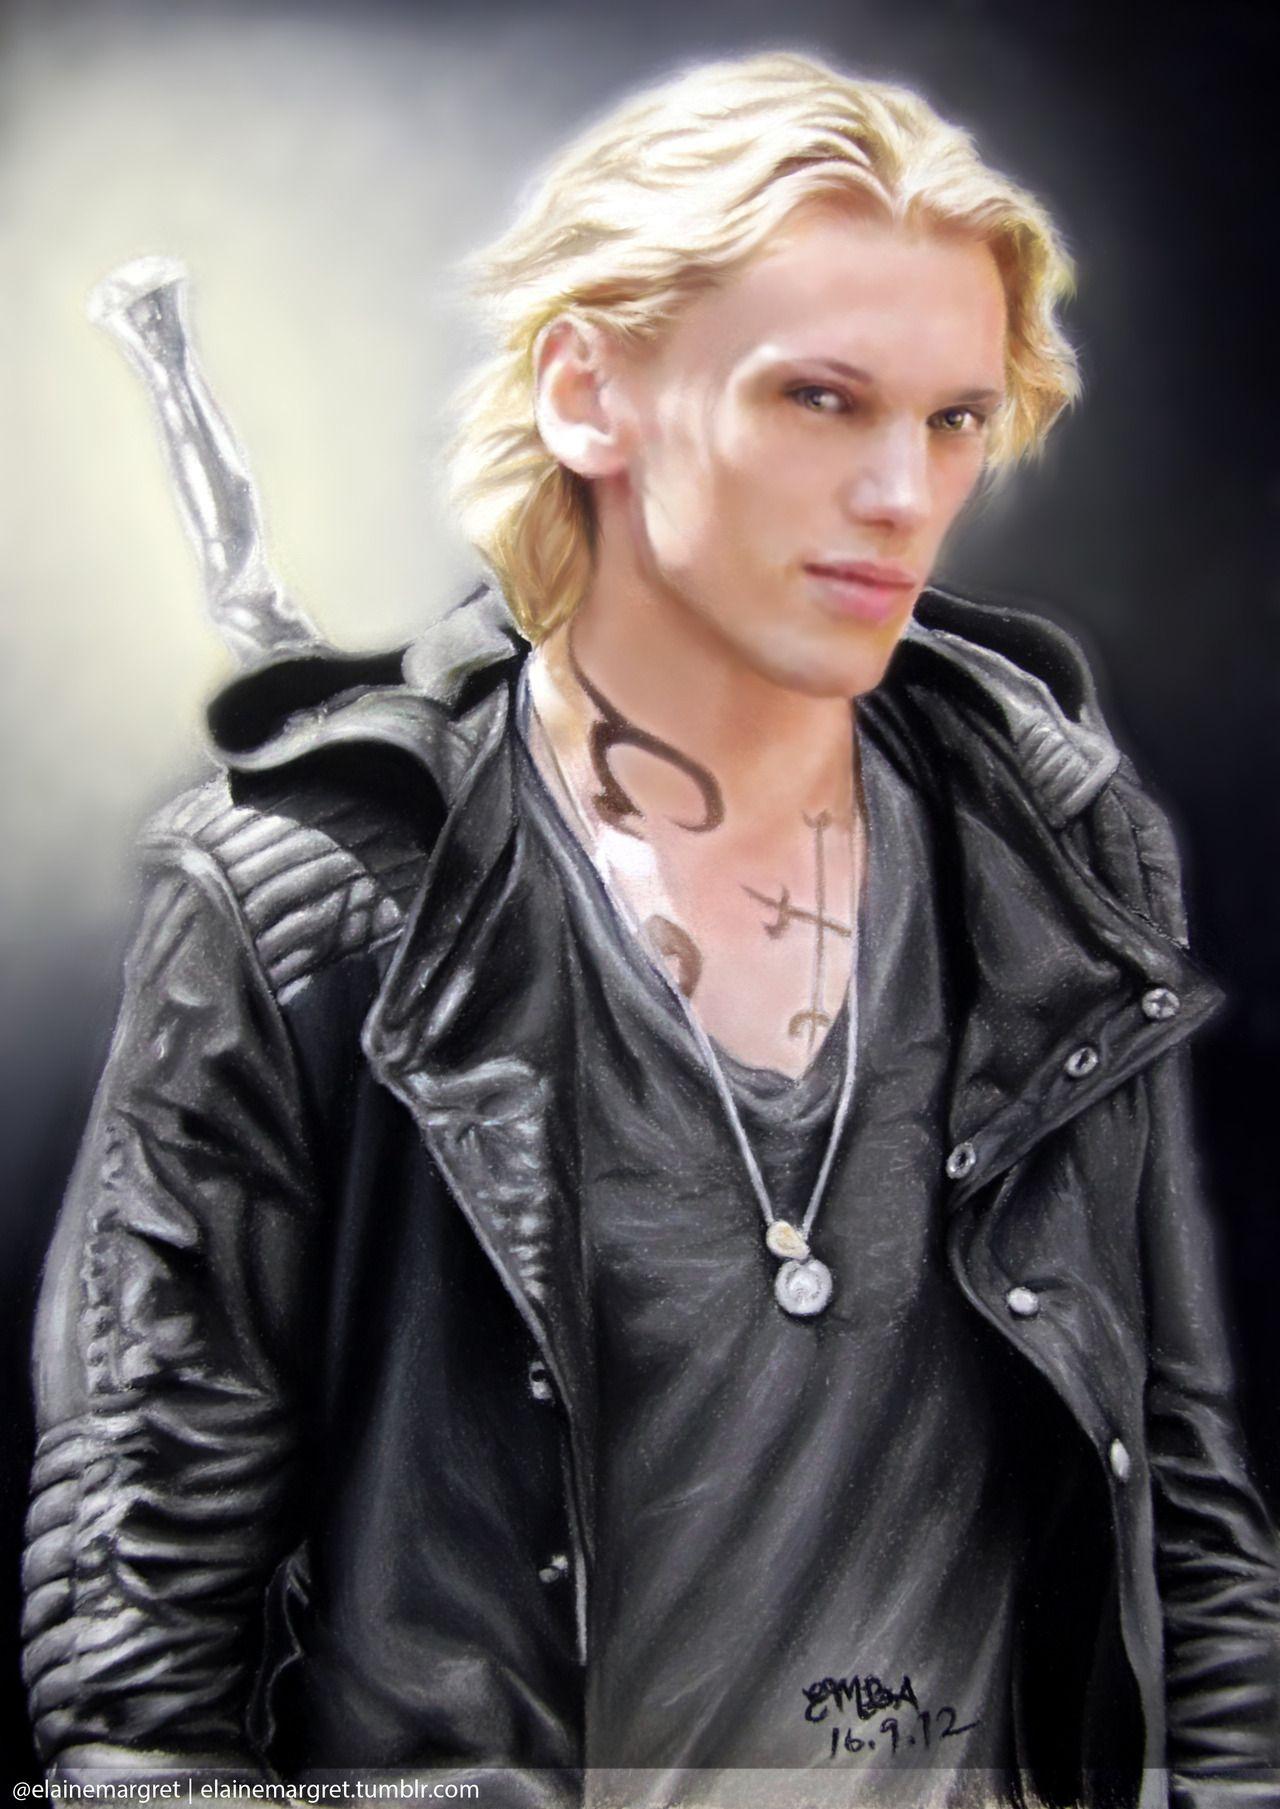 Jamie Campbell Bower as Jace Wayland of The Mortal Instruments: City